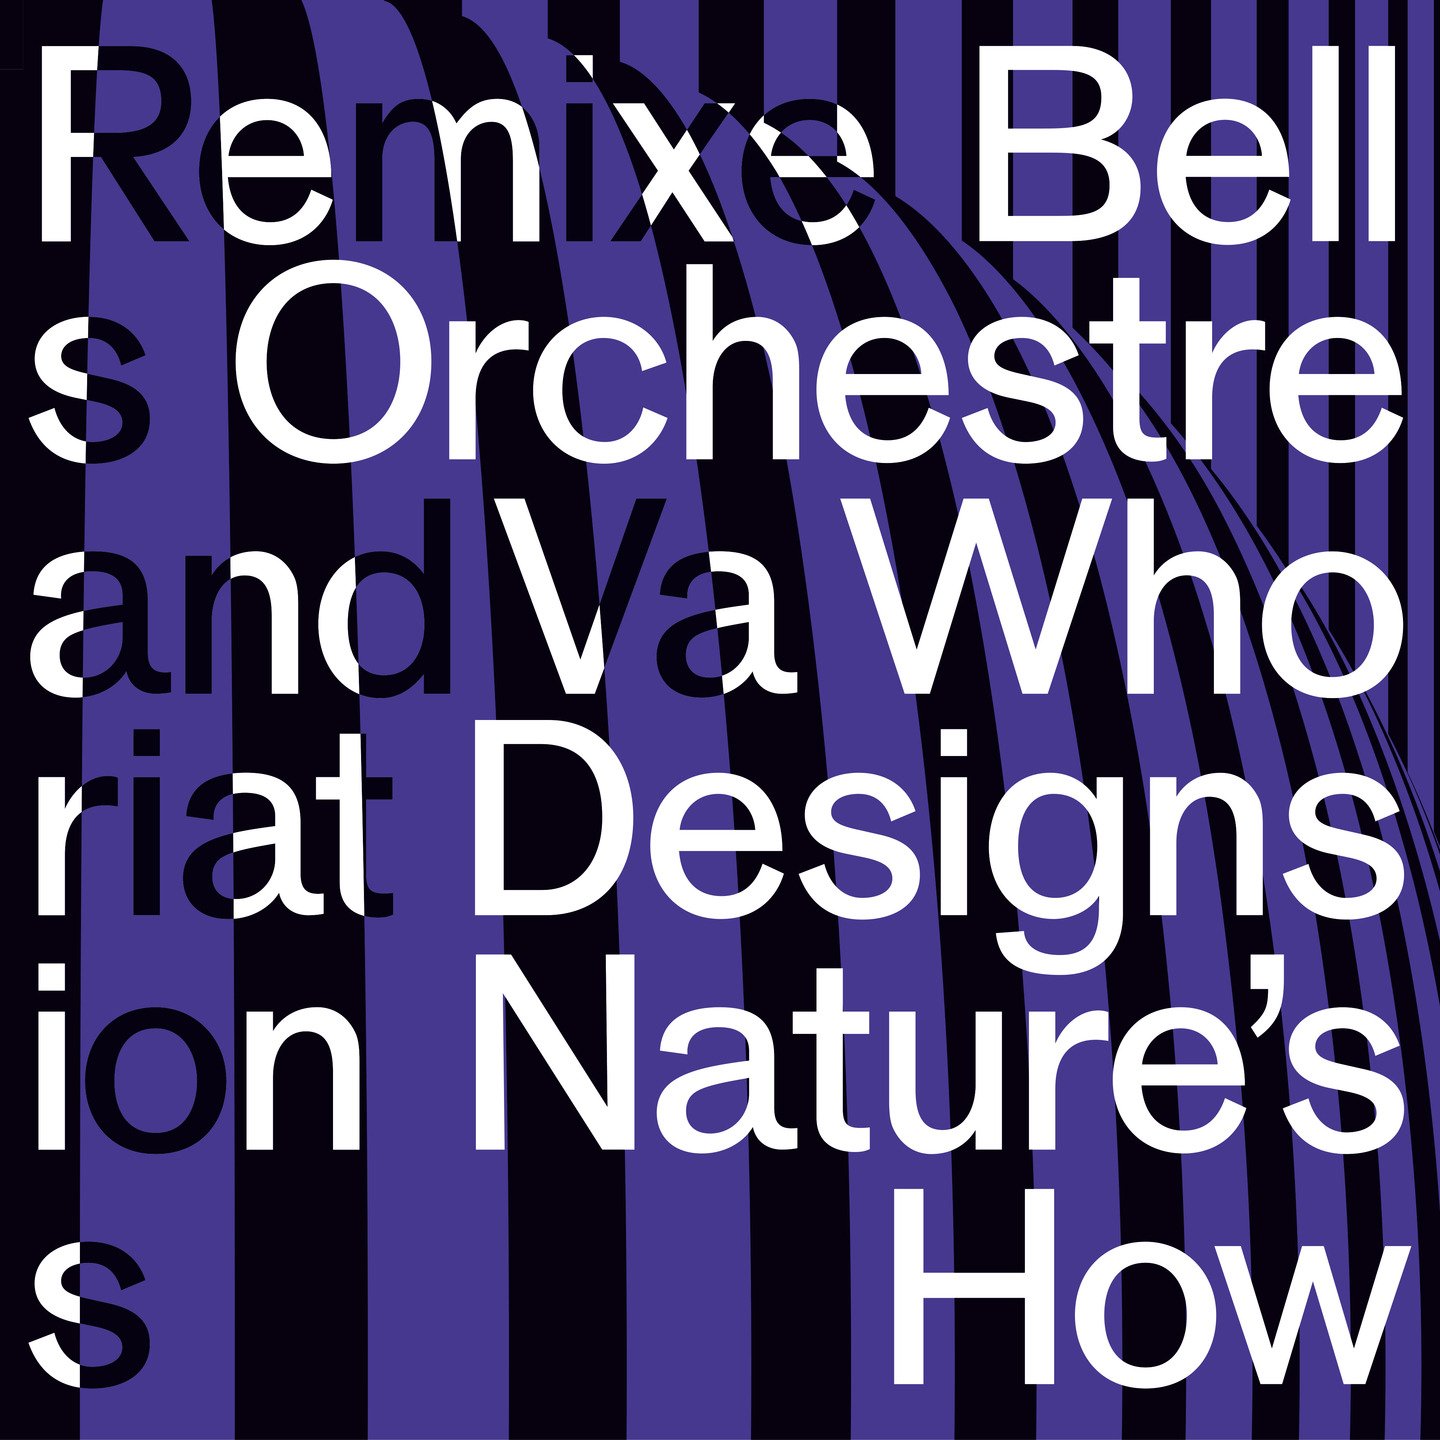 CD Shop - BELL ORCHESTRE WHO DESIGNS NATURE\